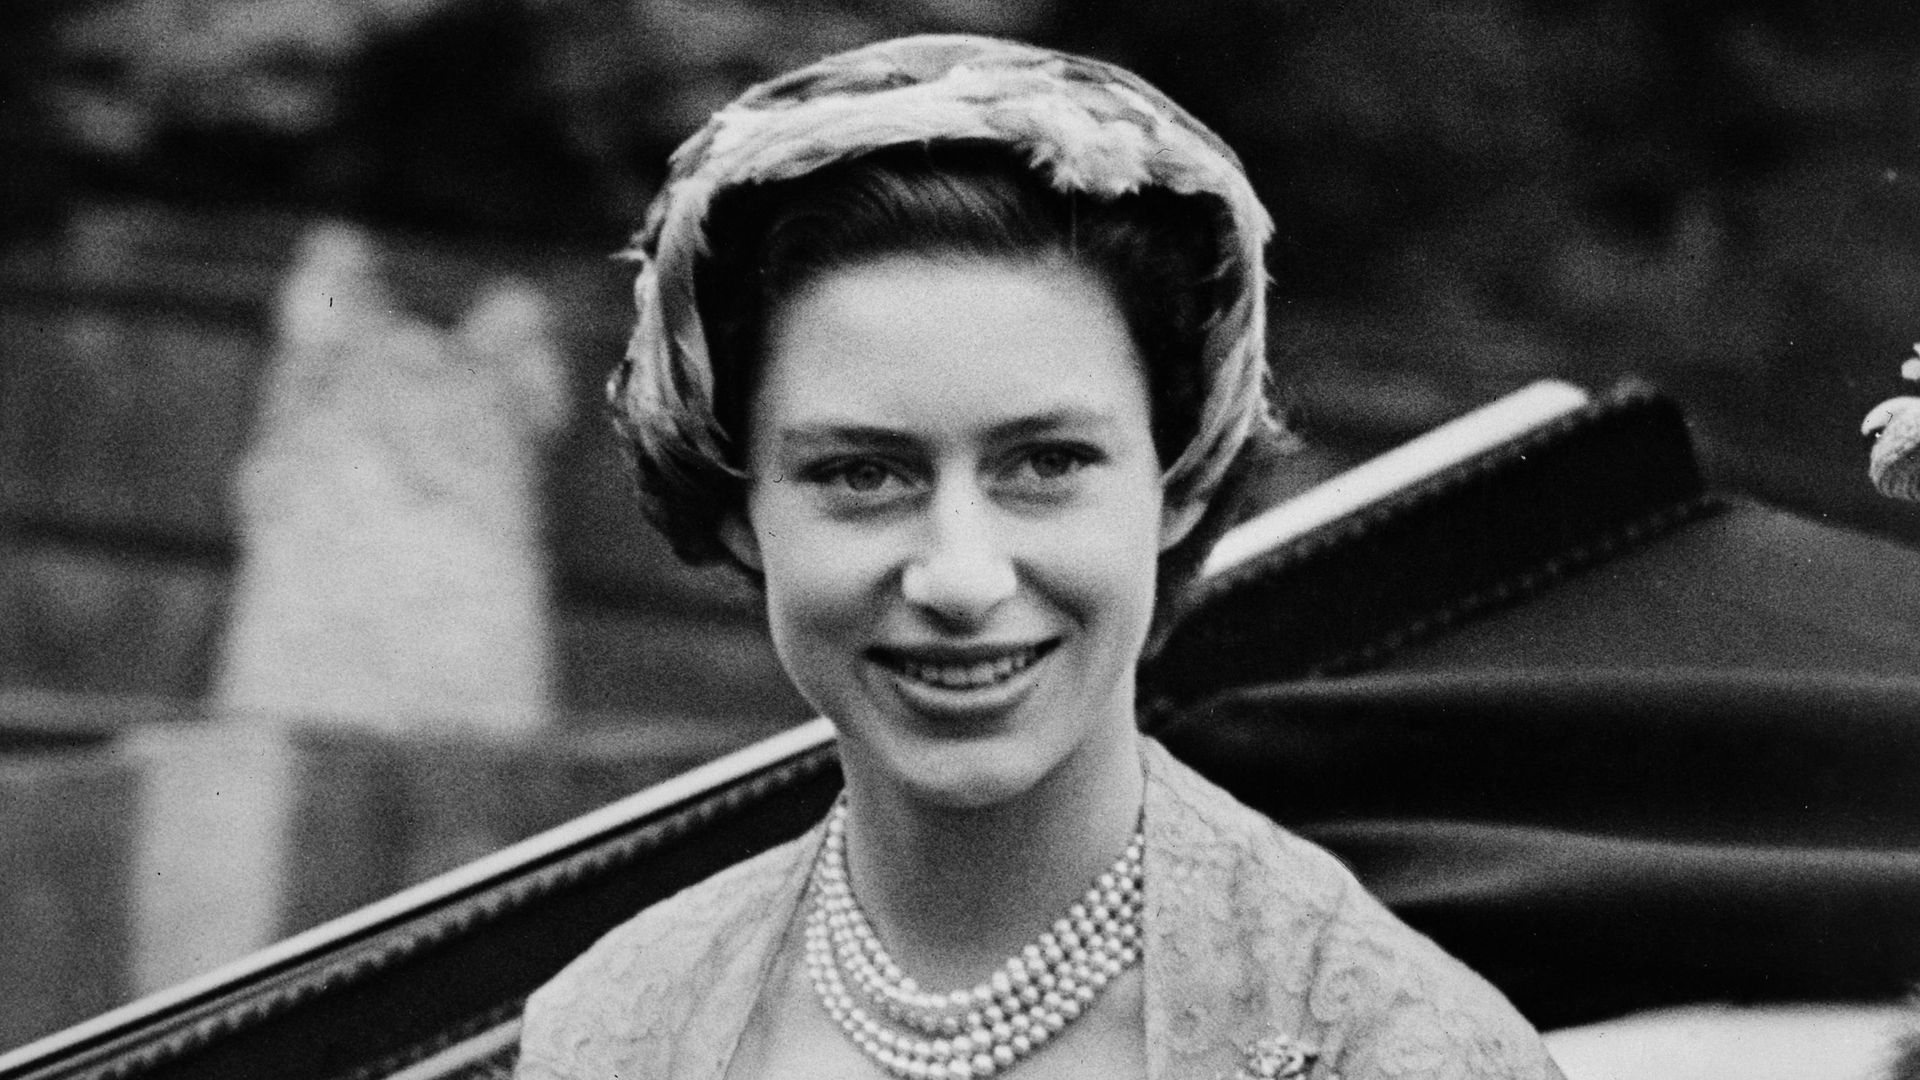 17th June 1952:  Princess Margaret (1930 - 2002) is driven to the opening meeting of the Royal Ascot horse-racing event near Windsor in Berkshire.  (Photo by Fox Photos/Getty Images)